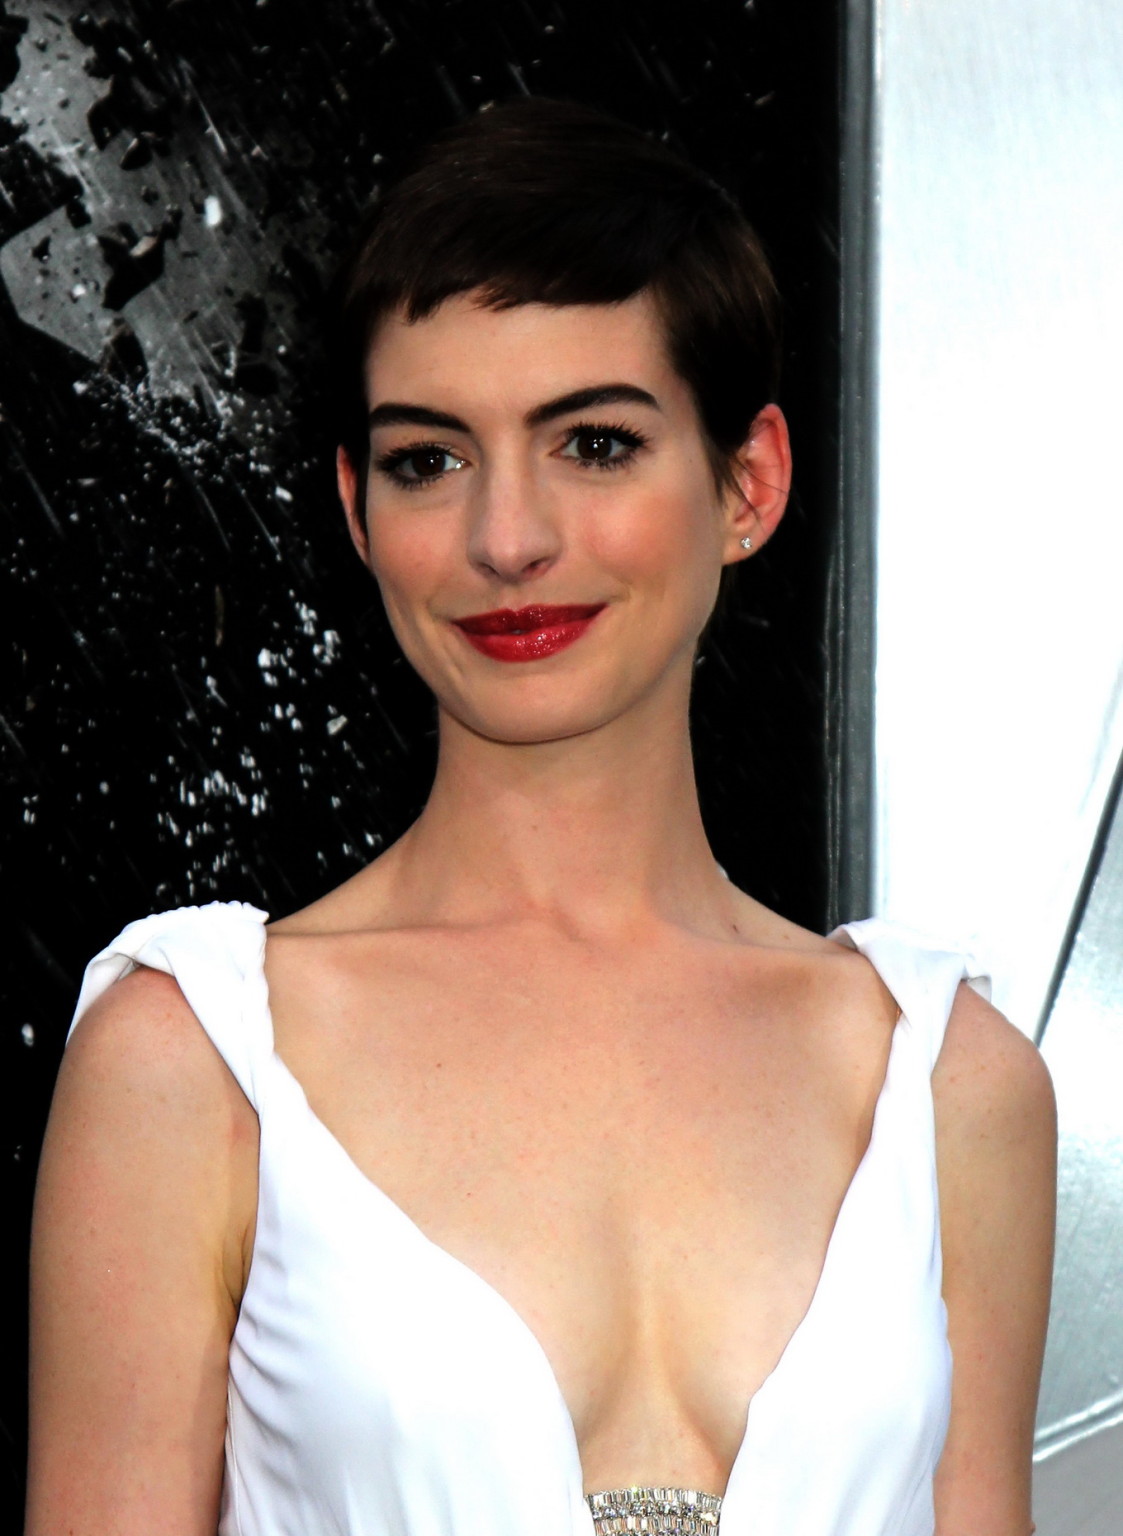 Anne Hathaway showing cleavage in white dress at 'Dark Knight Rises' premiere in #75257406